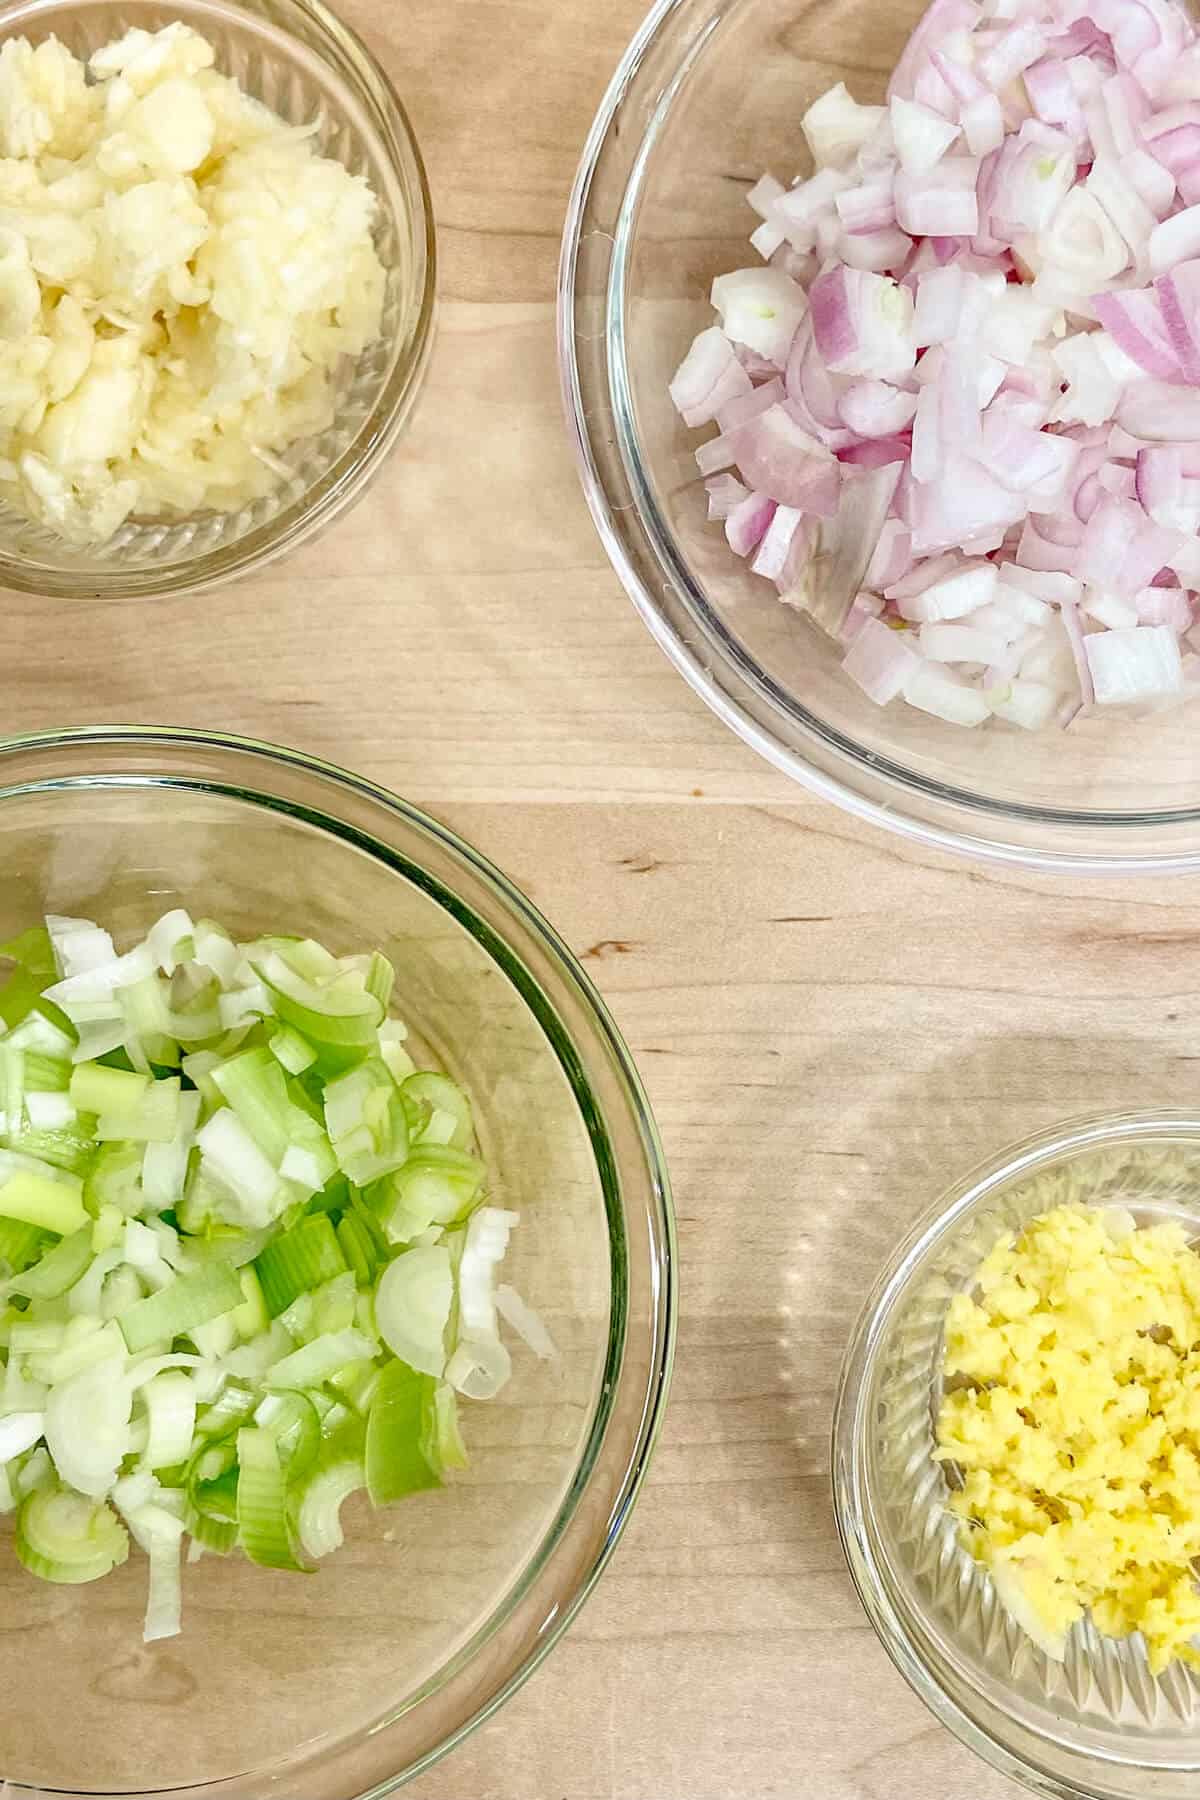 Scallions, garlic, ginger, and shallots in bowls mise en place.